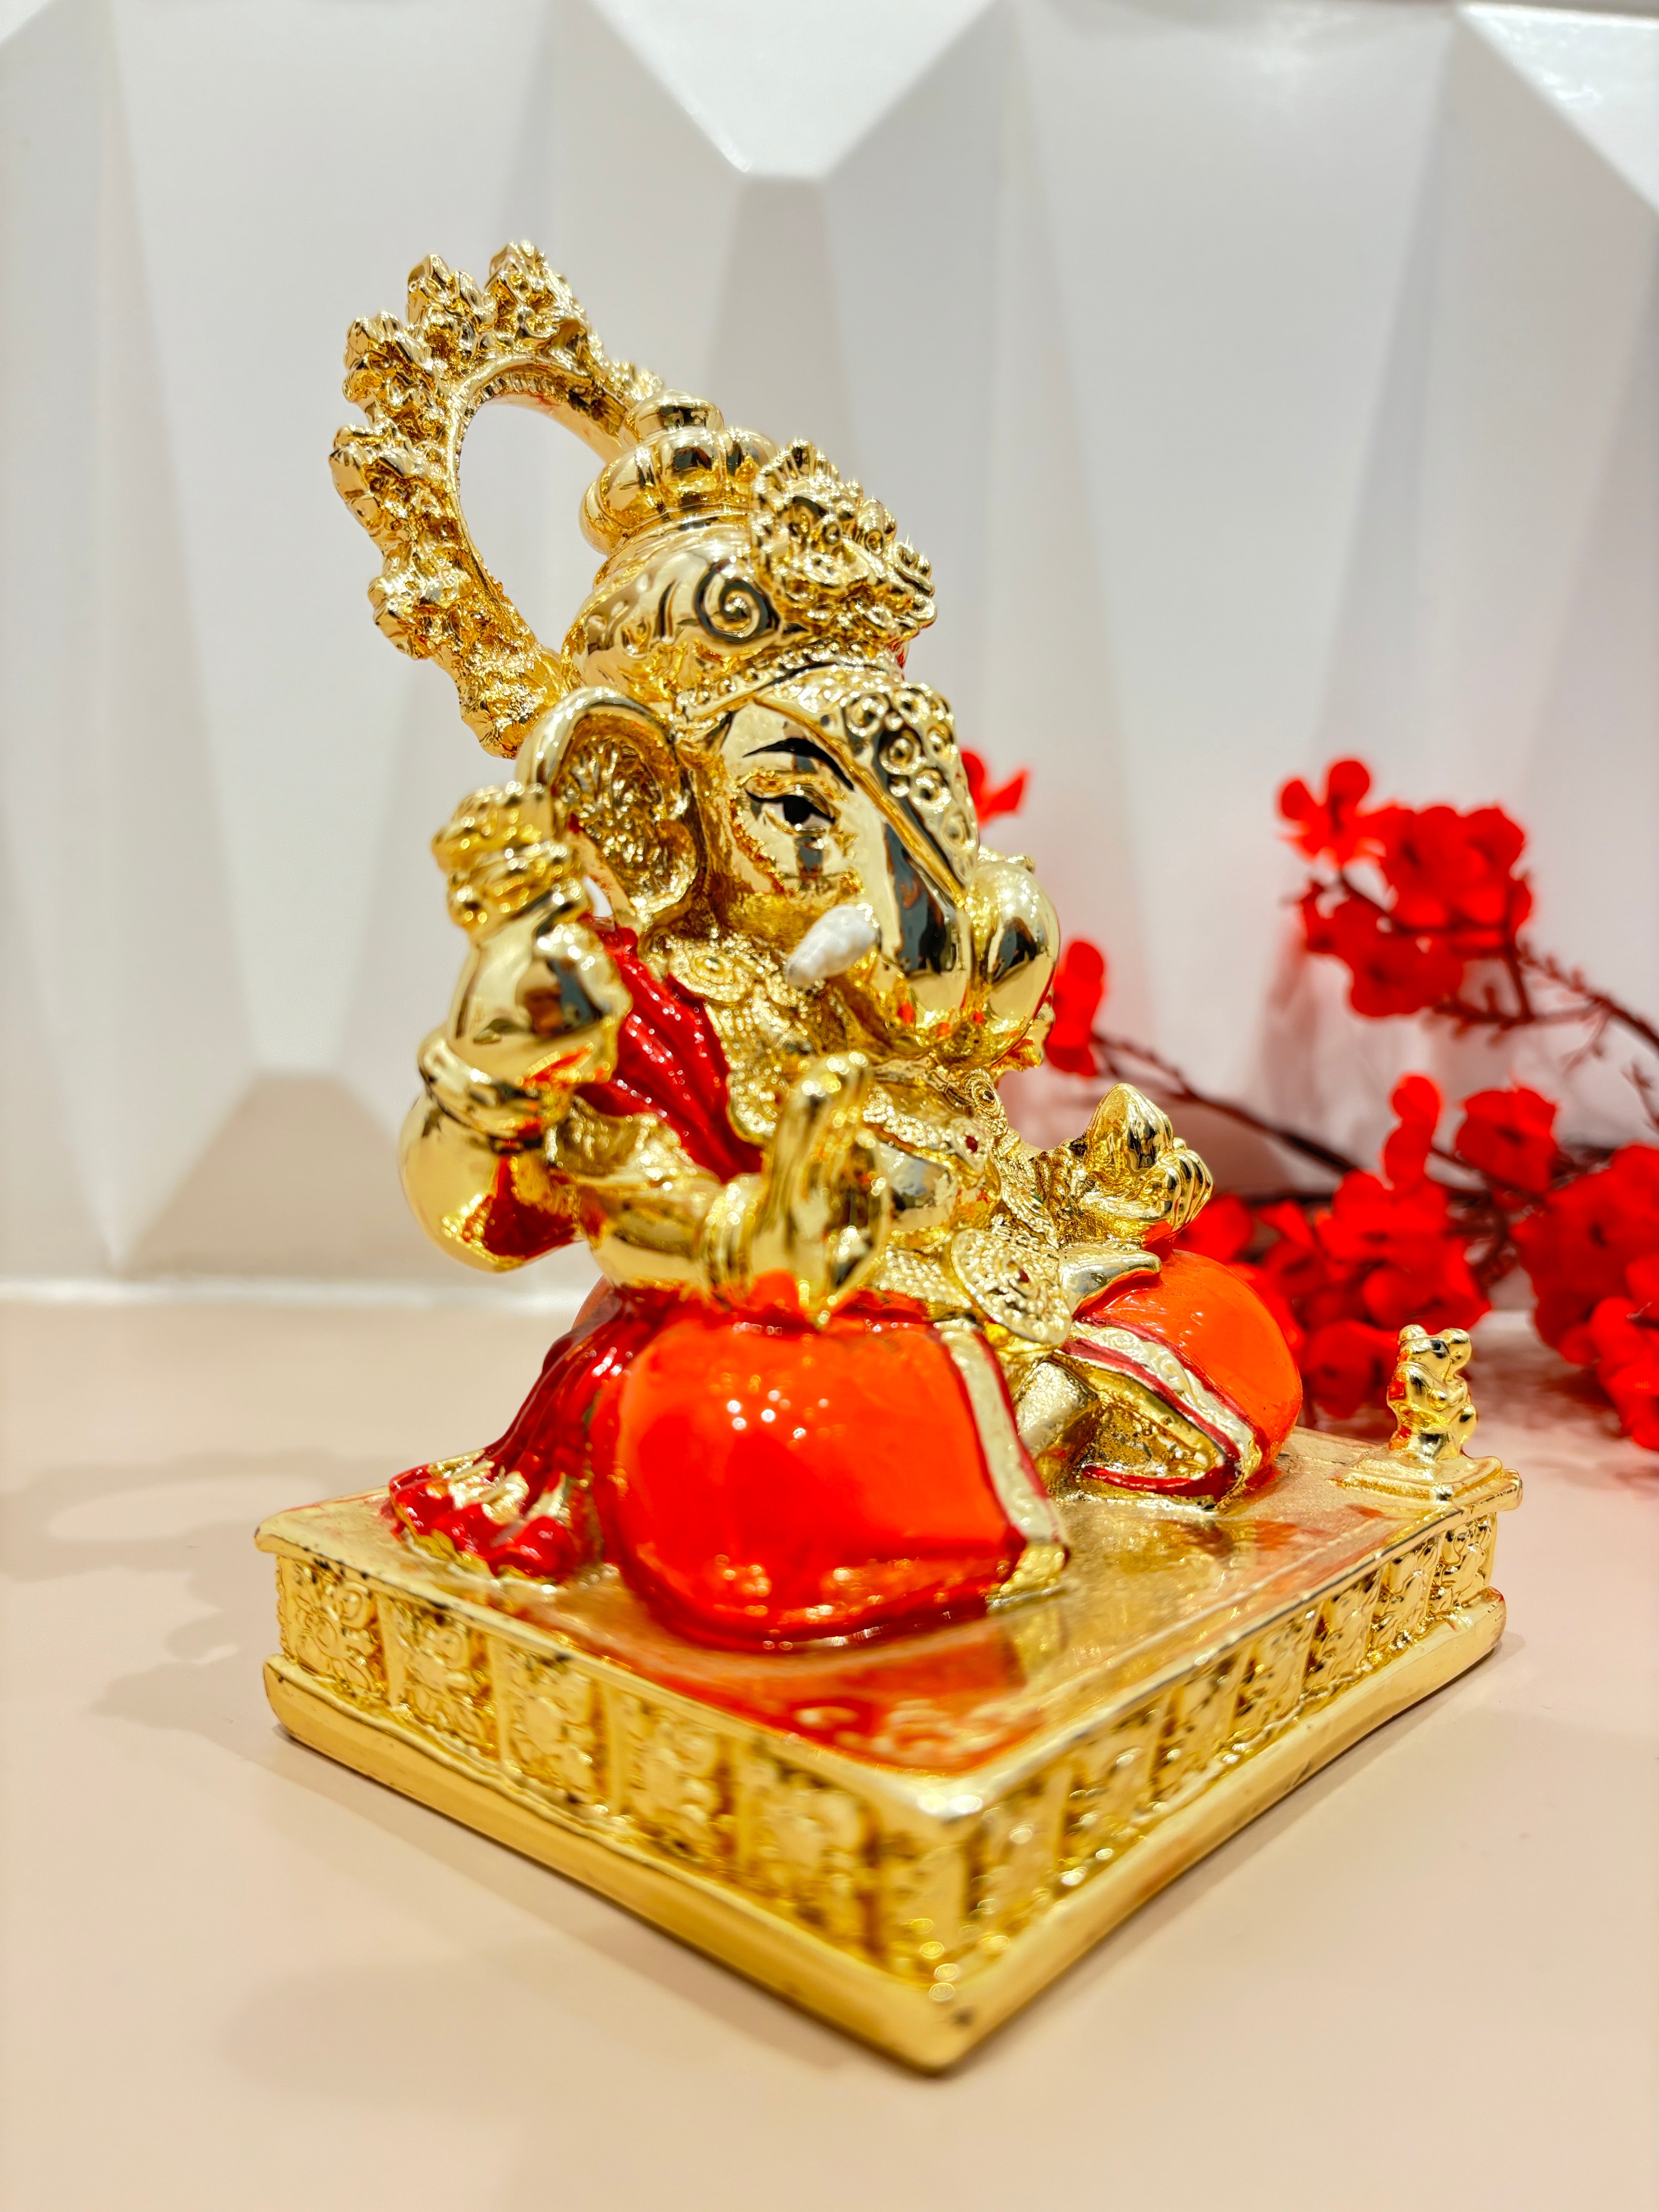 999 Gold Plated Ganesh Idol For Home| Good Luck Gift For New Beginnings